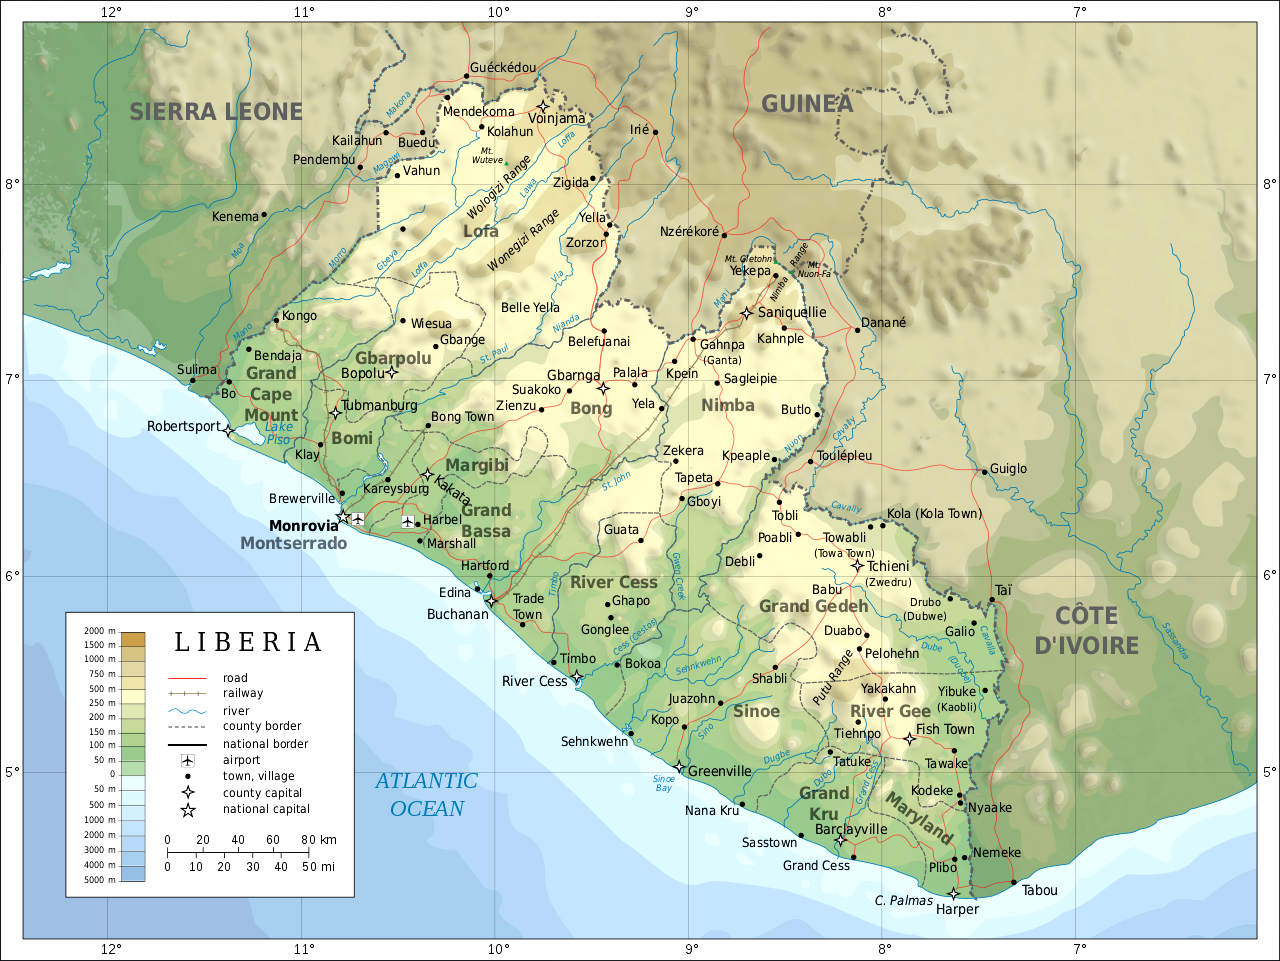 Liberia, officially the Republic of Liberia, is a country on the West African coast. It is bordered by Sierra Leone to its northwest, Guinea to its north, Ivory Coast to its east, and the Atlantic Ocean to its south and southwest. It has a population of around five and one-half million and covers an area of 43,000 square miles (111,369 km2). The country's official language is English; however, over 20 indigenous languages are spoken, reflecting the country's ethnic and cultural diversity. The capital and largest city is Monrovia.